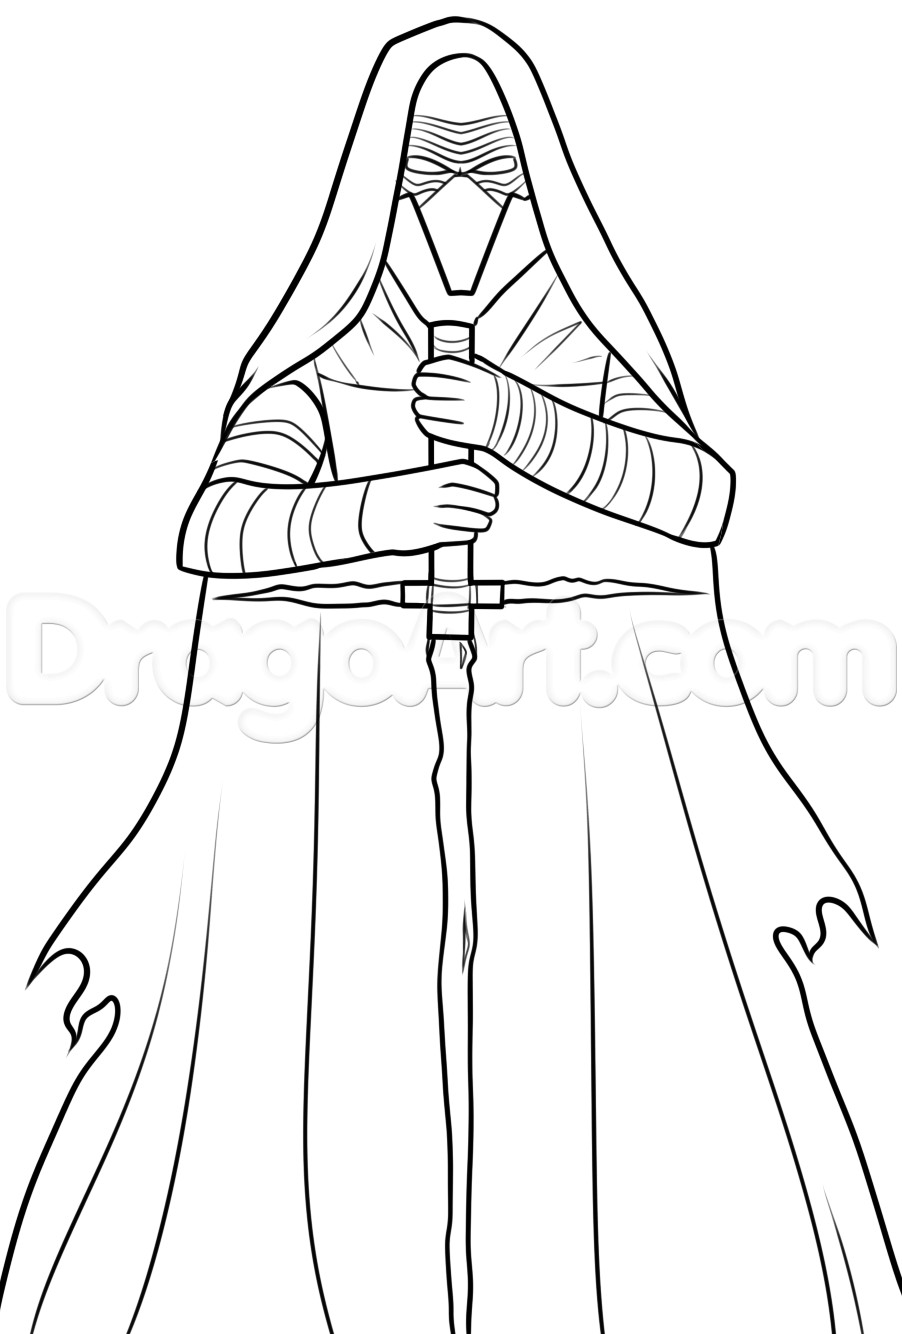 Kylo Ren Coloring Pages
 How to Draw Kylo Ren Kylo Ren Star Wars VII Step by Step